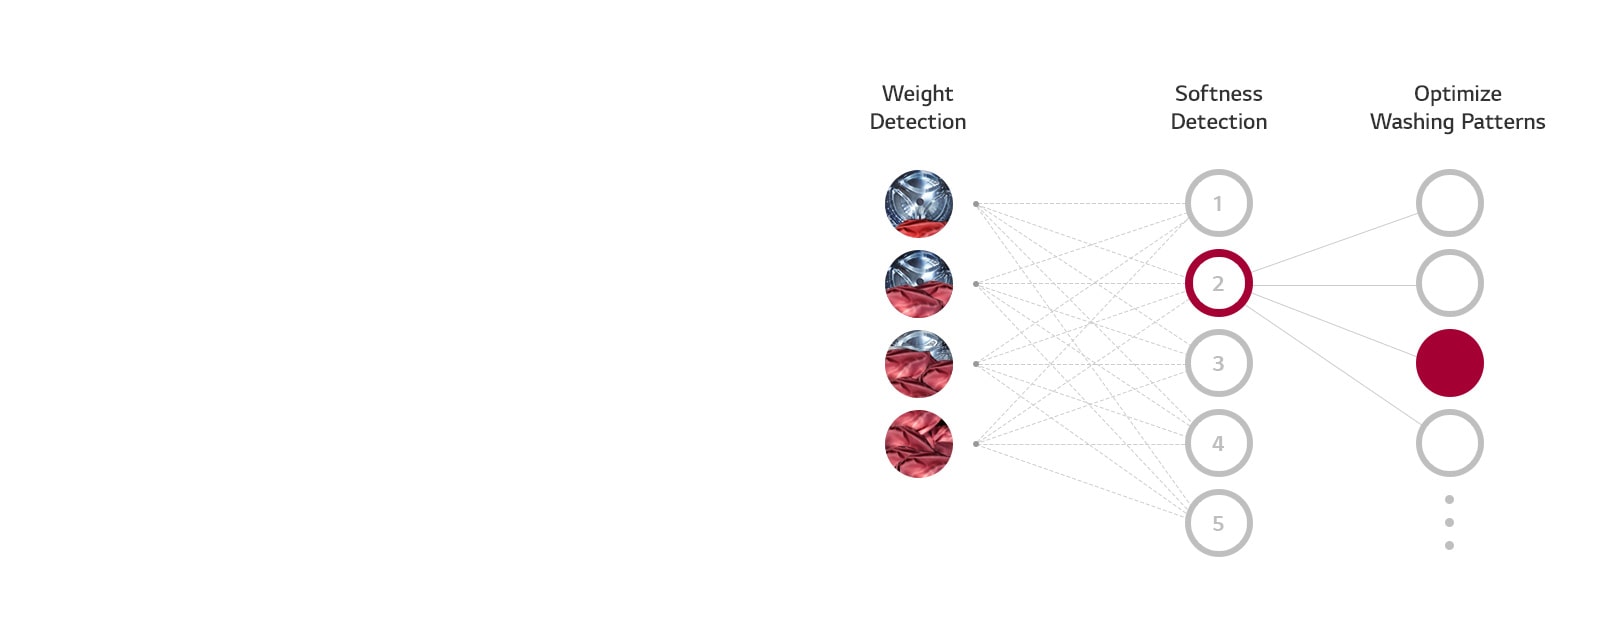 Three columns representing Weight Detection, Softness Detection, and Optimize Washing Patterns with levels beneath show how the AI DD of the washing machine chooses the optimal wash setting.